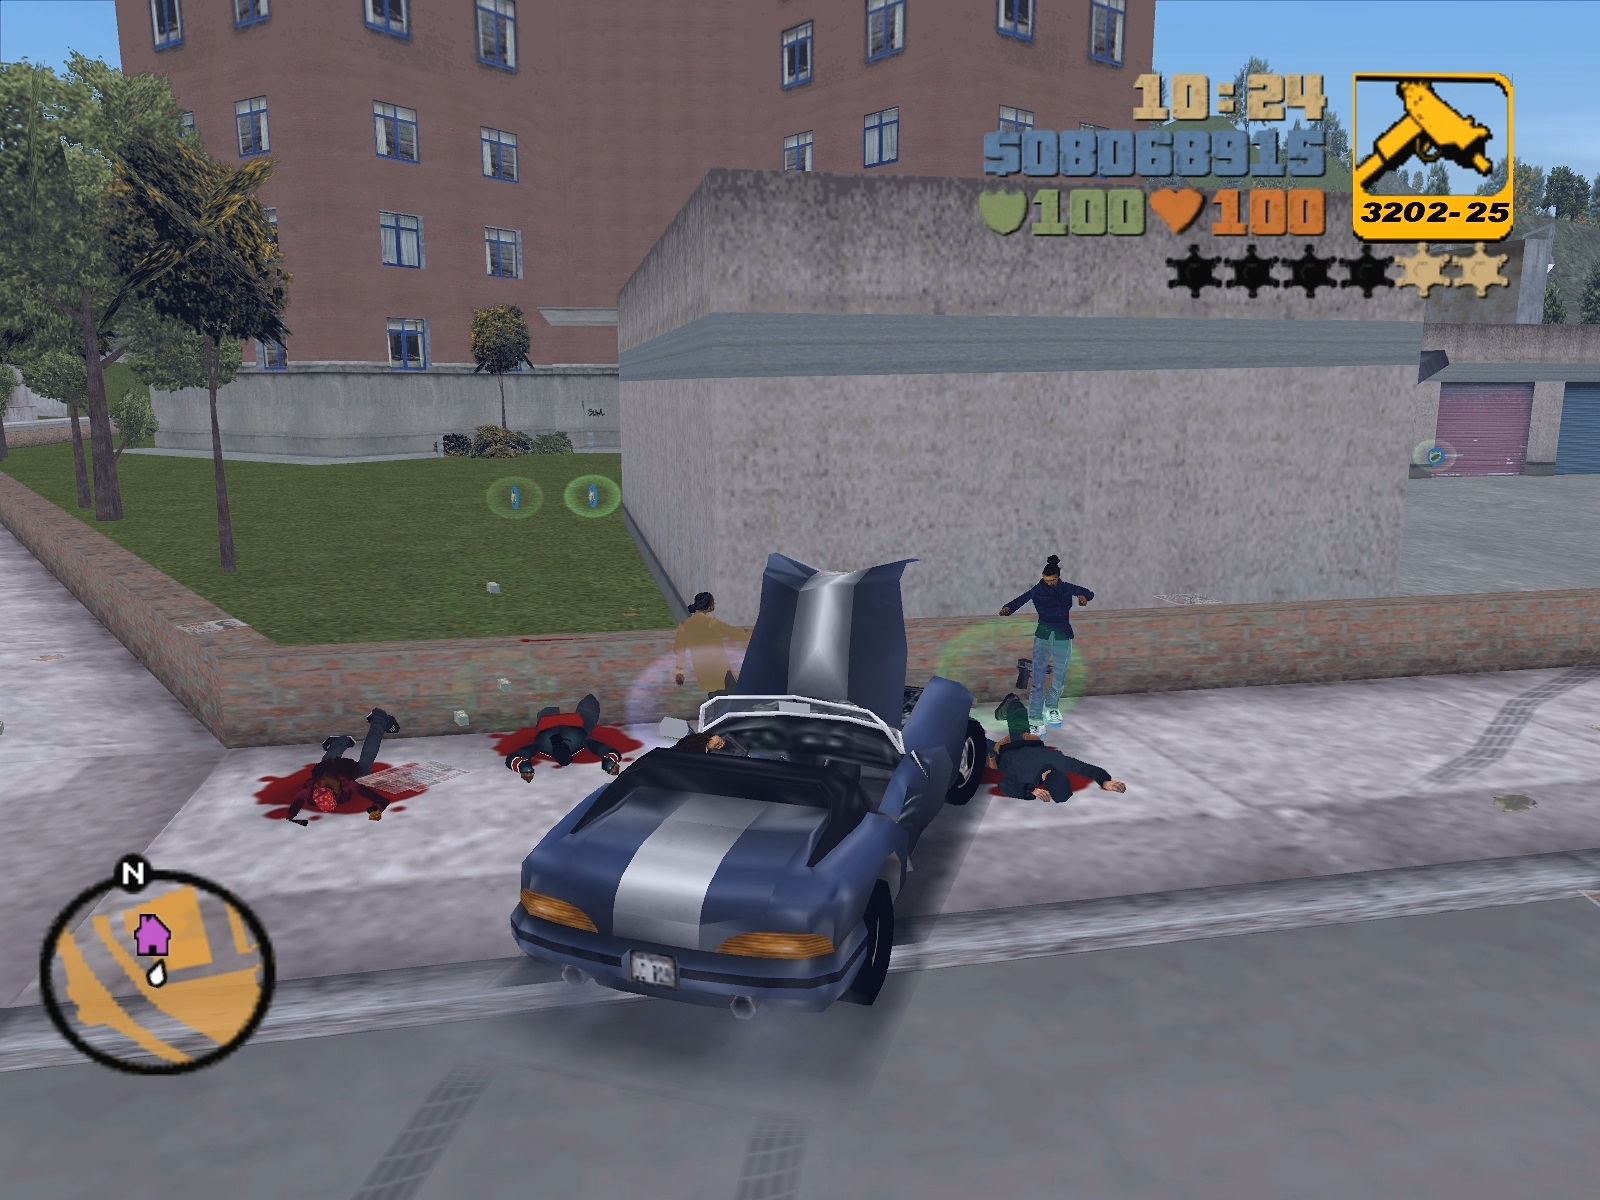 Gta 3 apk + sd data free download for android mobile